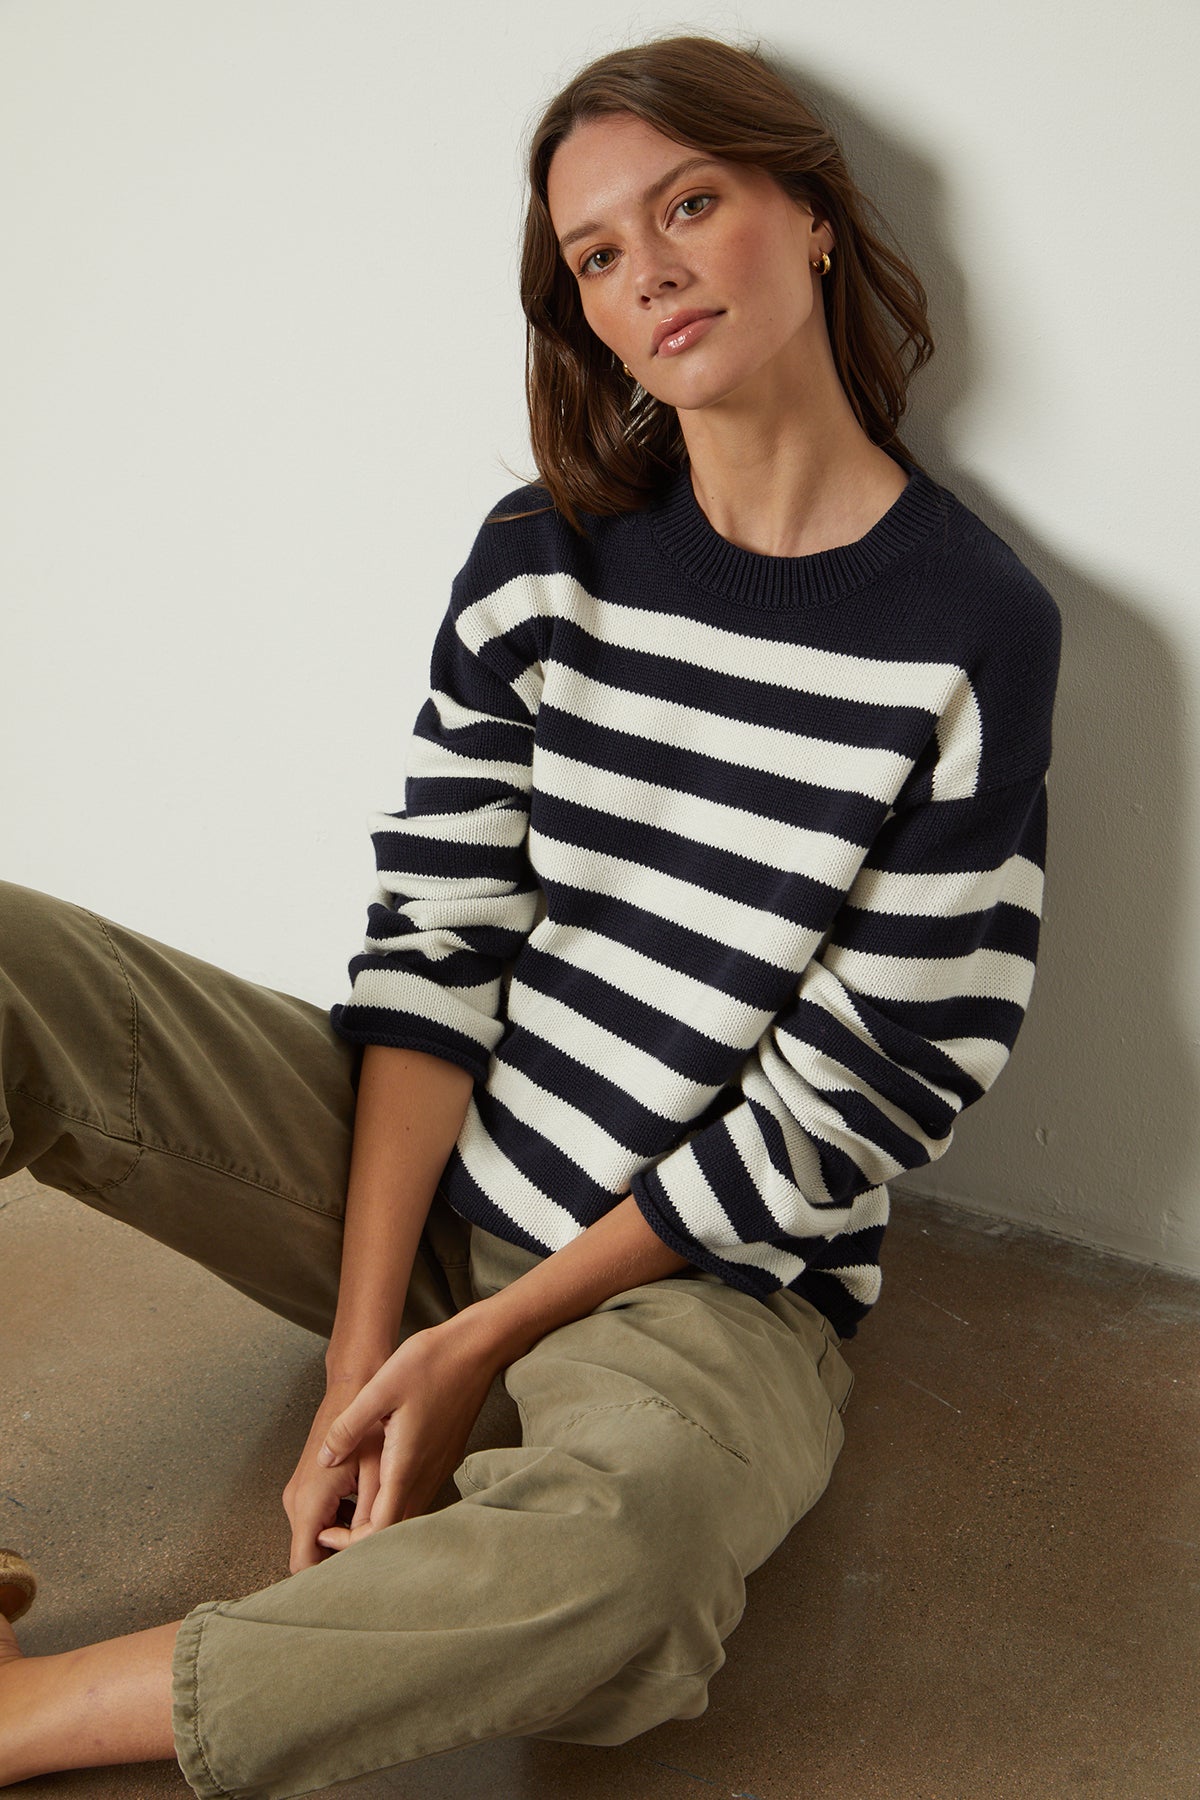 A woman wearing a Velvet by Graham & Spencer LEX STRIPED CREW NECK SWEATER and khaki pants.-25916265726145